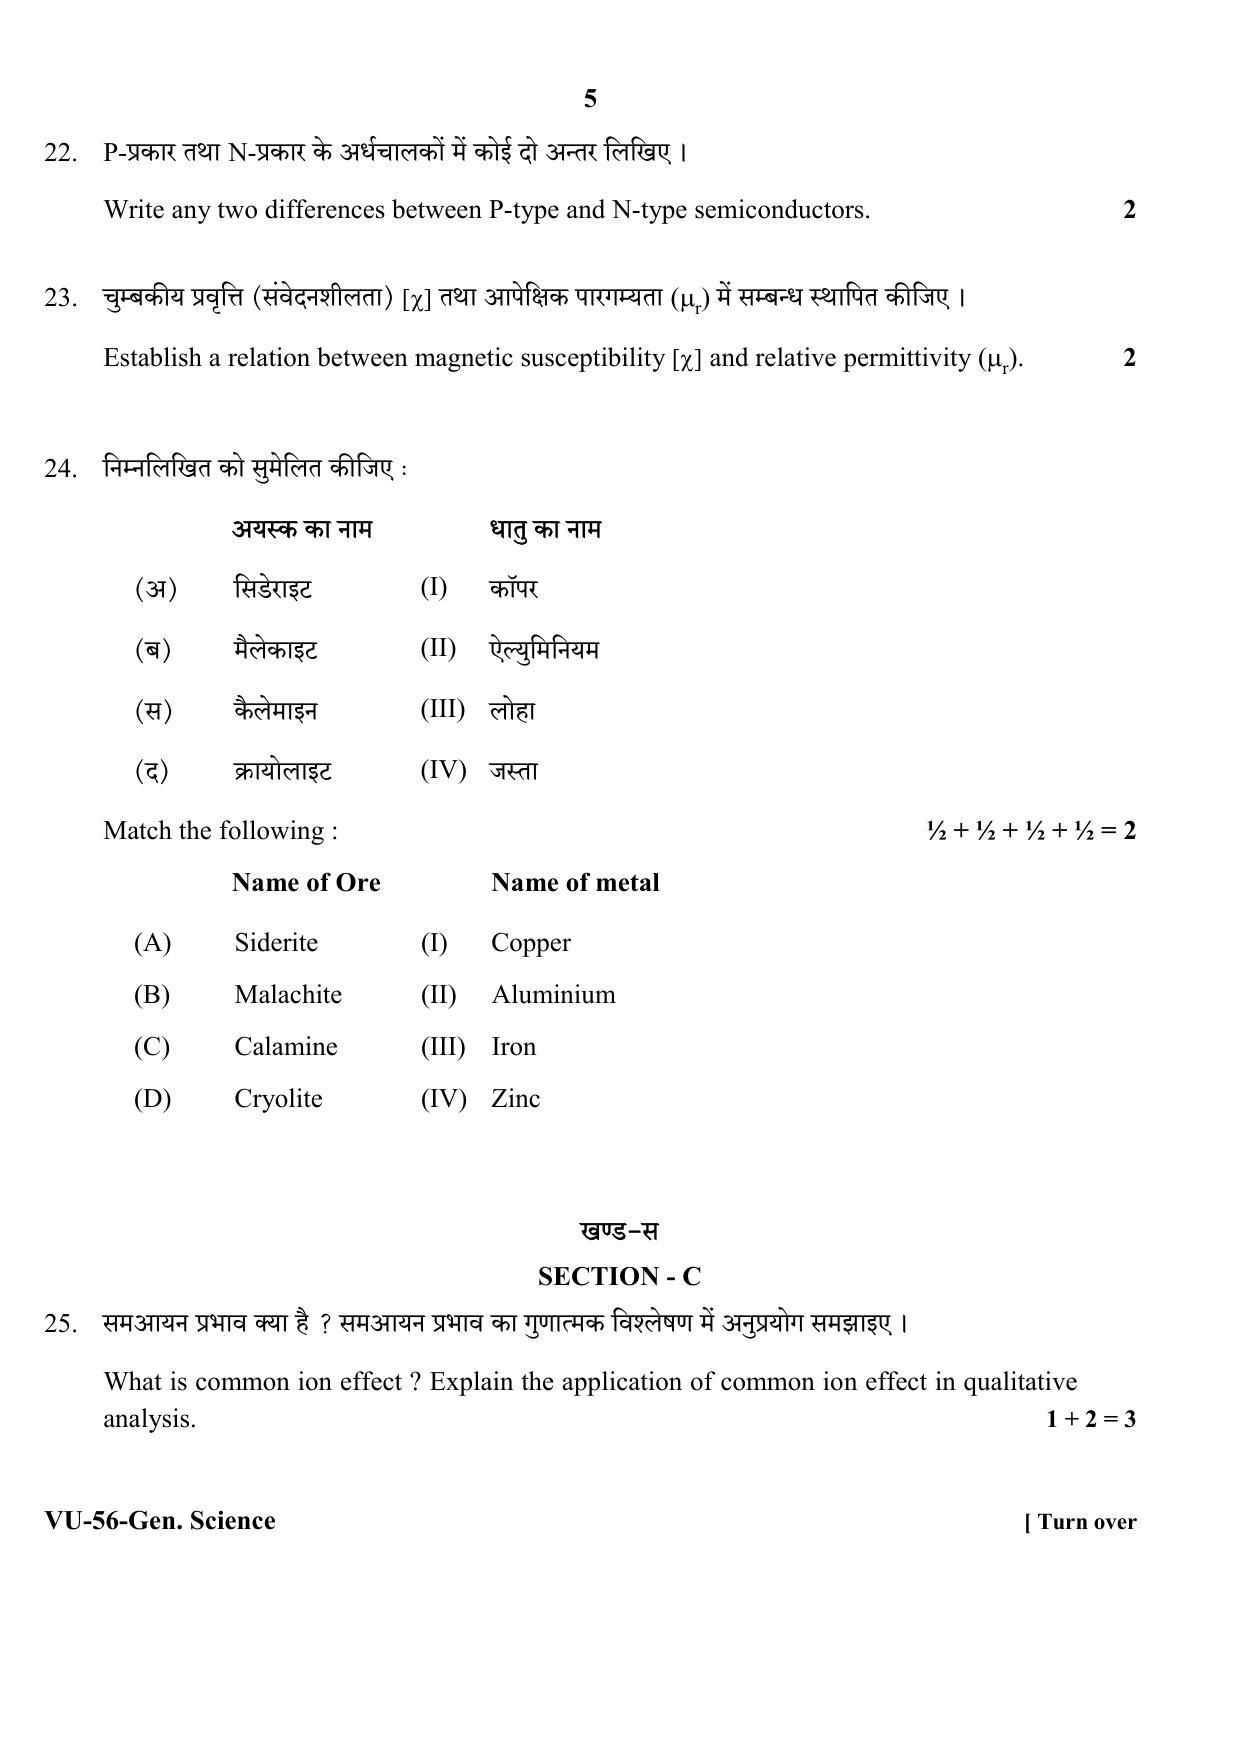 RBSE 2020 General Science Upadhyay Question Paper - Page 5